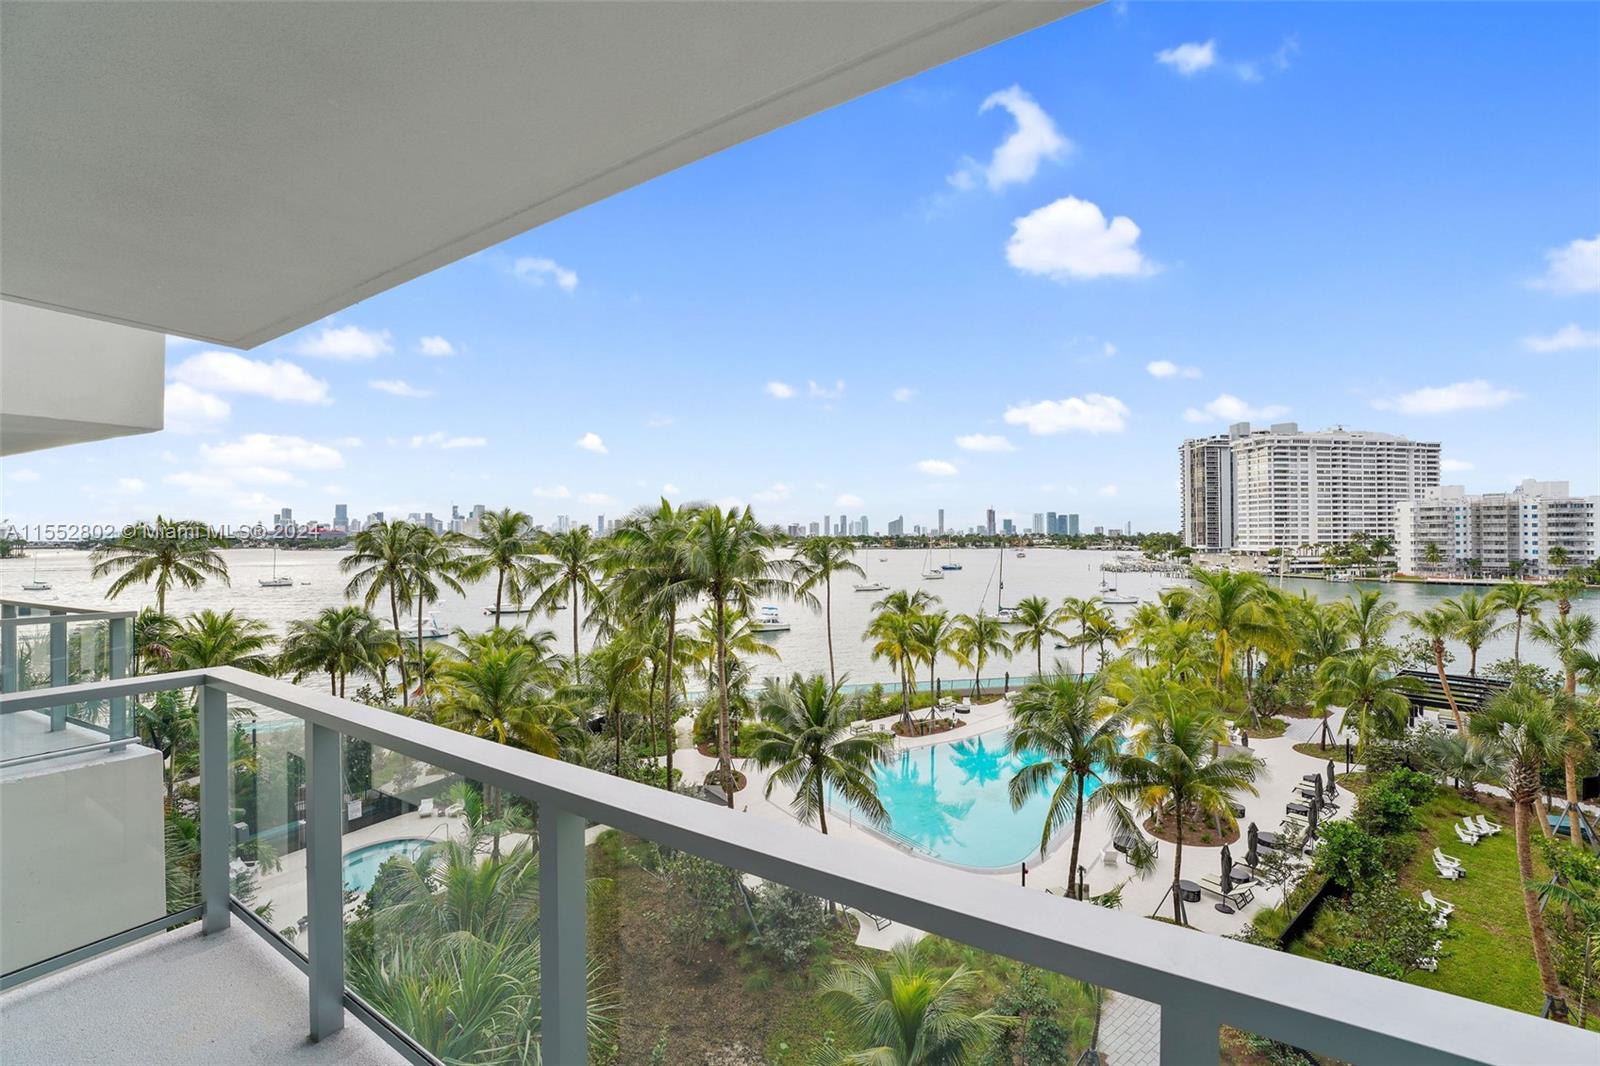 *Receive one month free on immediate move-in, apply by 05/19. AVAILABLE 04/23. Photos may be from the exact unit on the same line but on another floor. Welcome to Flamingo Point Miami Beach's most exciting rental community. This unit features hardwood floors, modern kitchen & baths w/SS appliances & granite counter tops. Amenities include fitness center, two resort style pools with private cabanas, BBQ area and much more. Move in costs are 1st month + $1500 deposit. Parking cost 1st vchl. $187 p/m. *FAST APPROVAL! (NOTE: Rental rates are subject to change depending on move-in date and lease term. Advertised rate is best rate and maybe on leases longer than 12 months. Income must be greater than 3x one month's rent and minimum credit score of 620 in order to be approved).